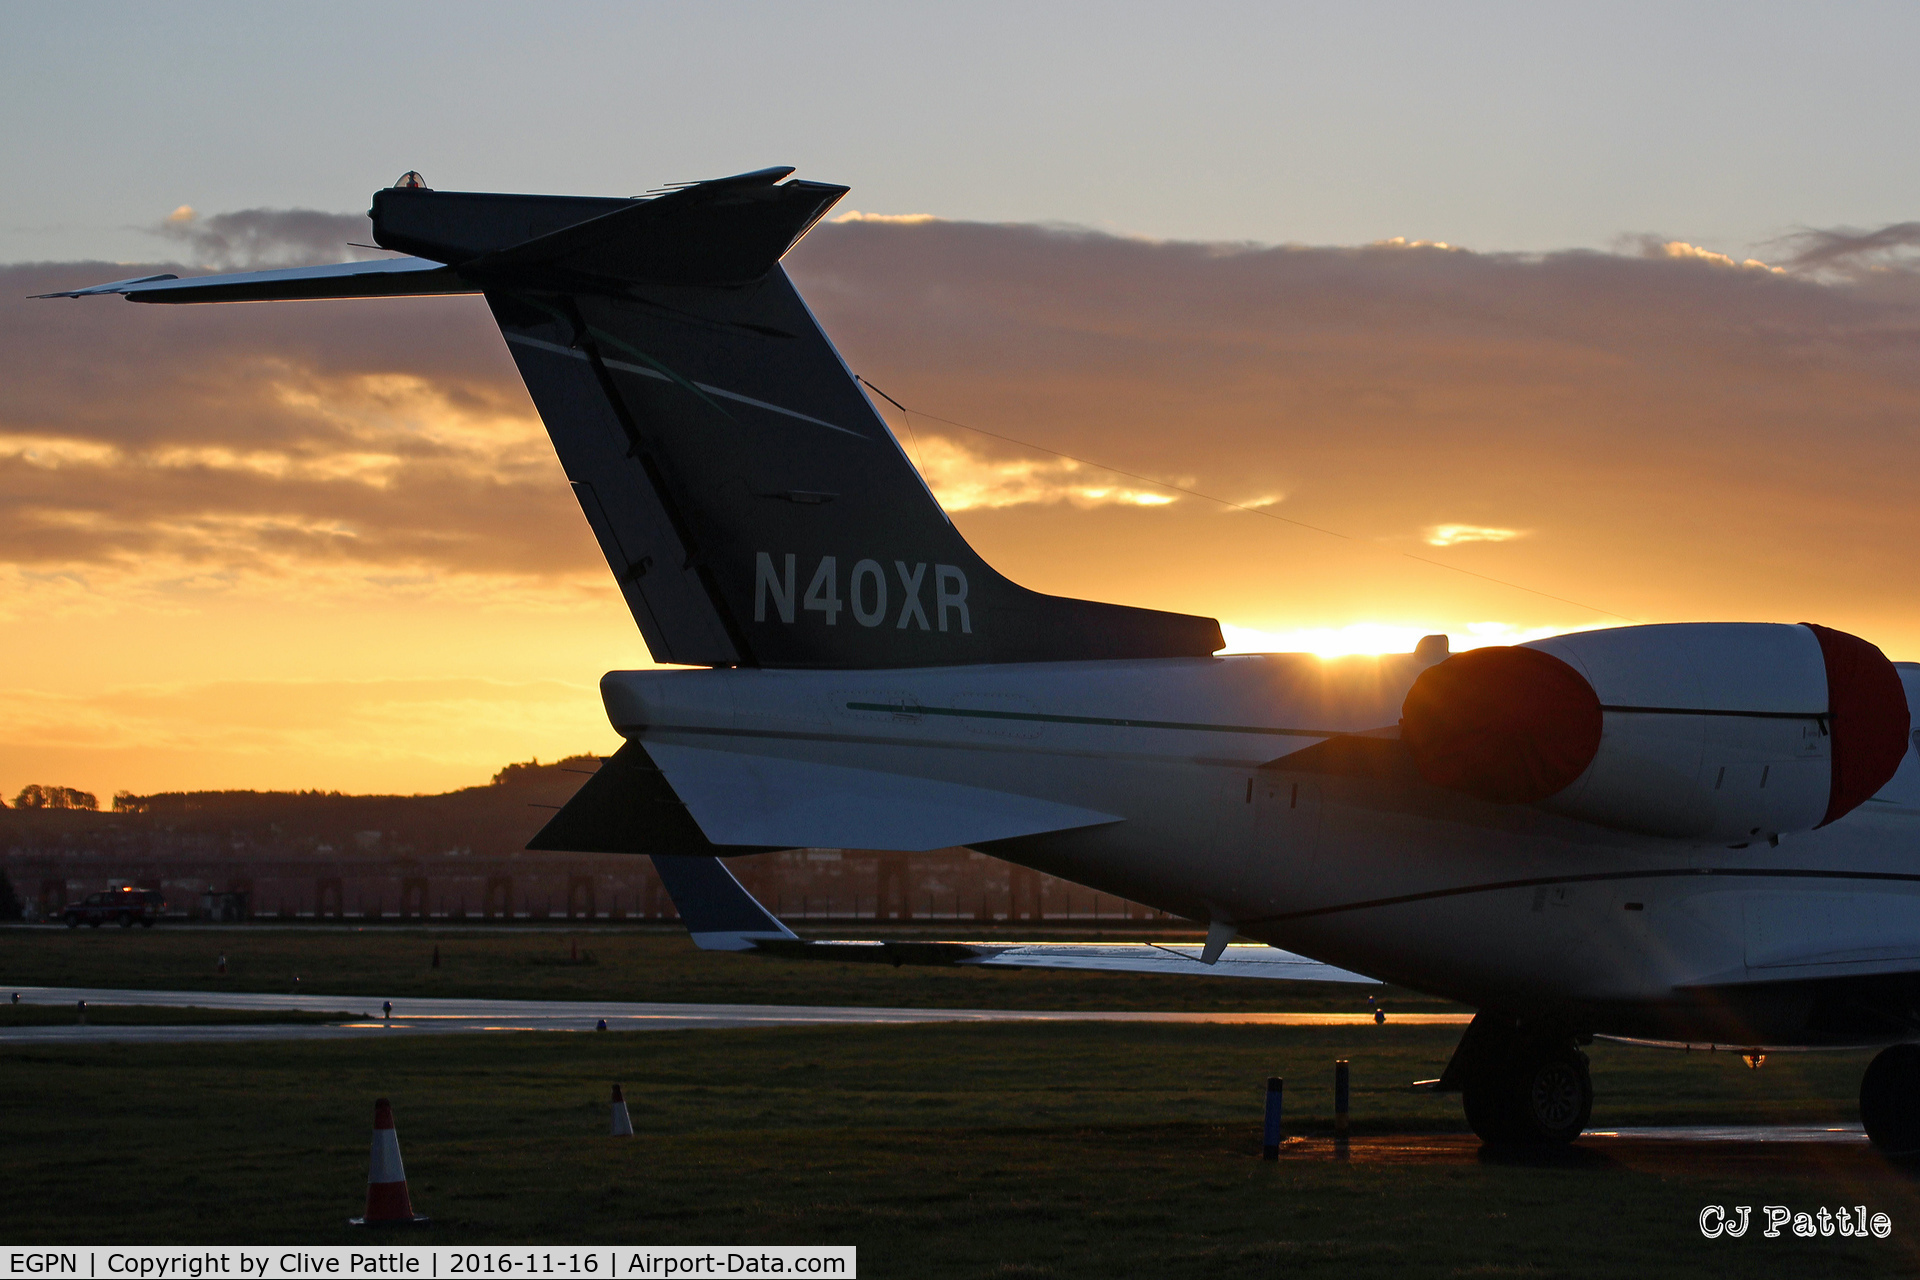 Dundee Airport, Dundee, Scotland United Kingdom (EGPN) - Early November apron view